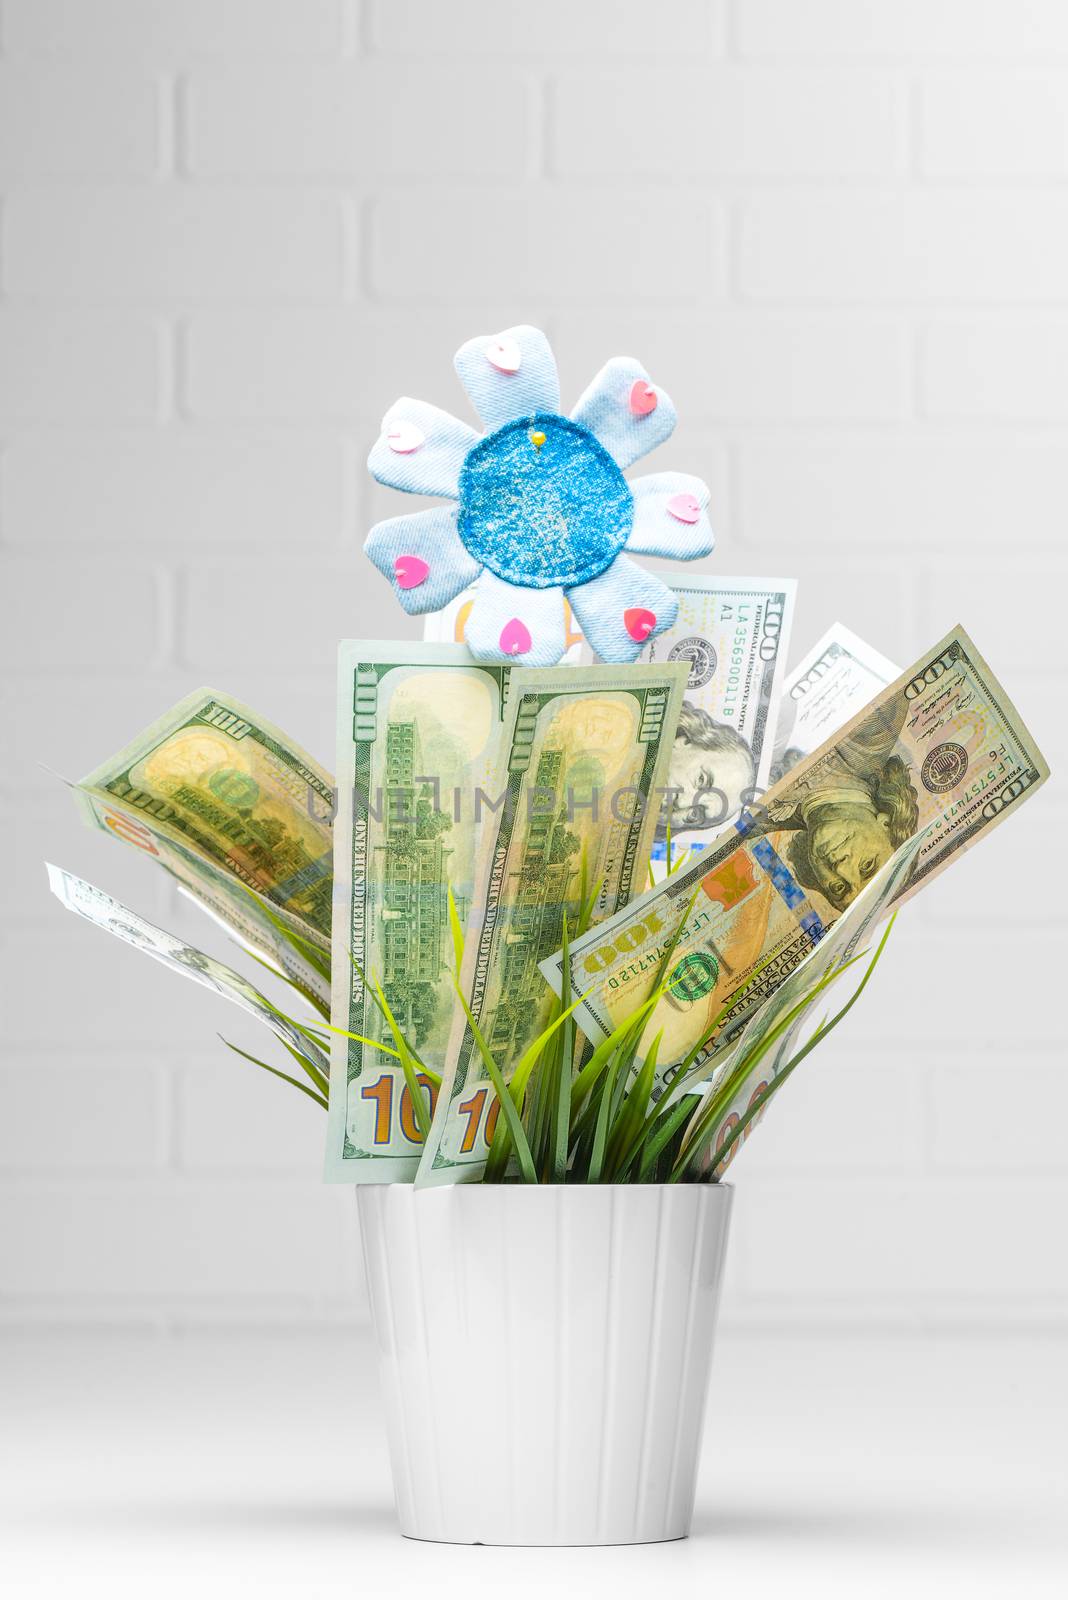 Financial growth. Money Growing in Flower Pot by kosmsos111